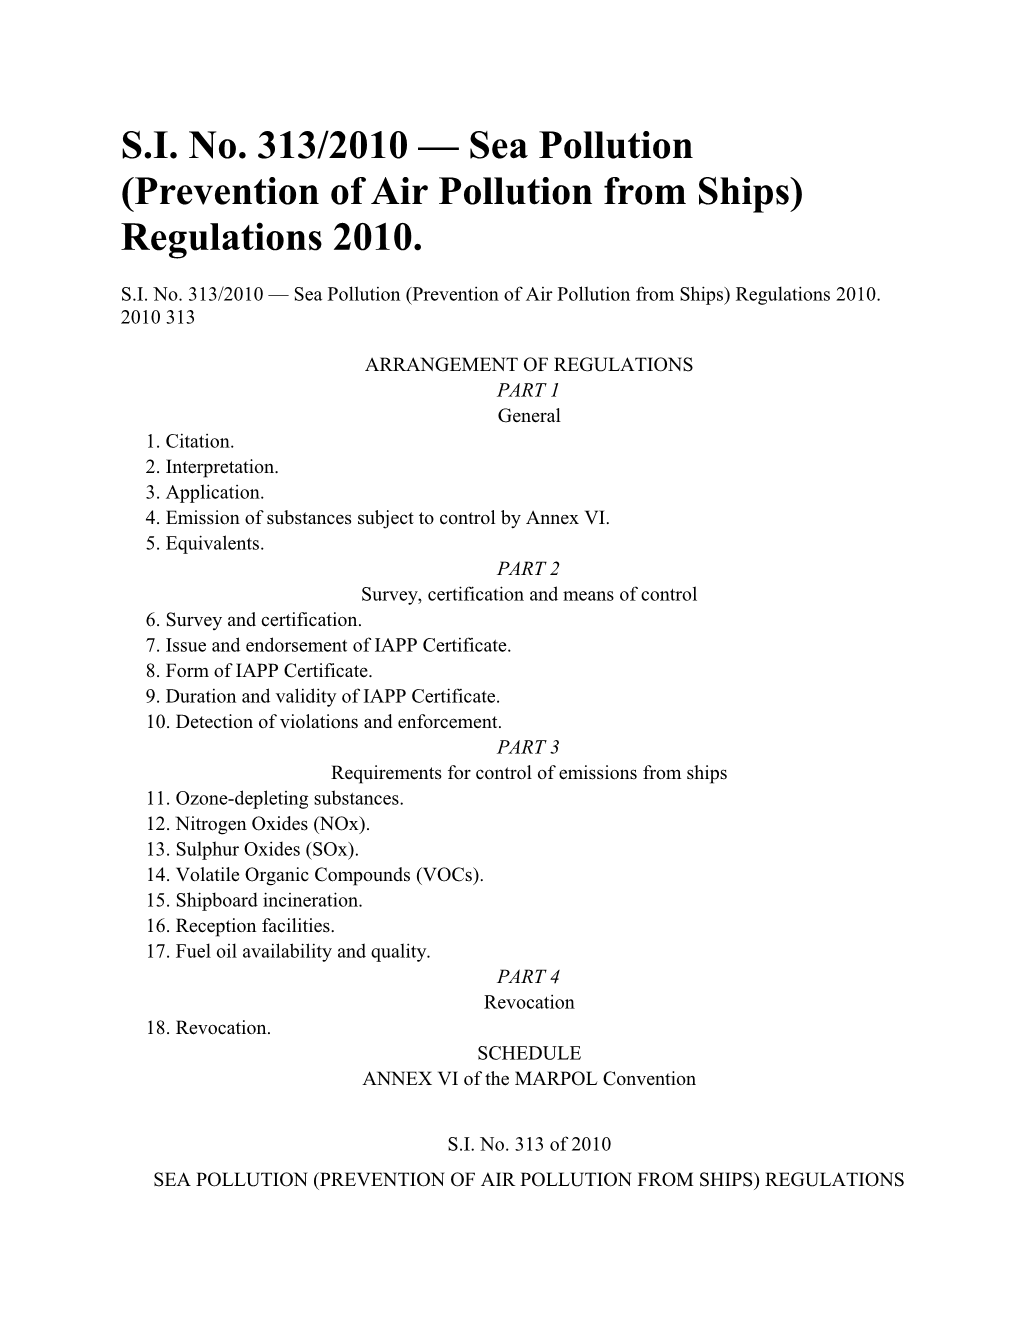 S.I. No. 313/2010 Sea Pollution (Prevention of Air Pollution from Ships) Regulations 2010